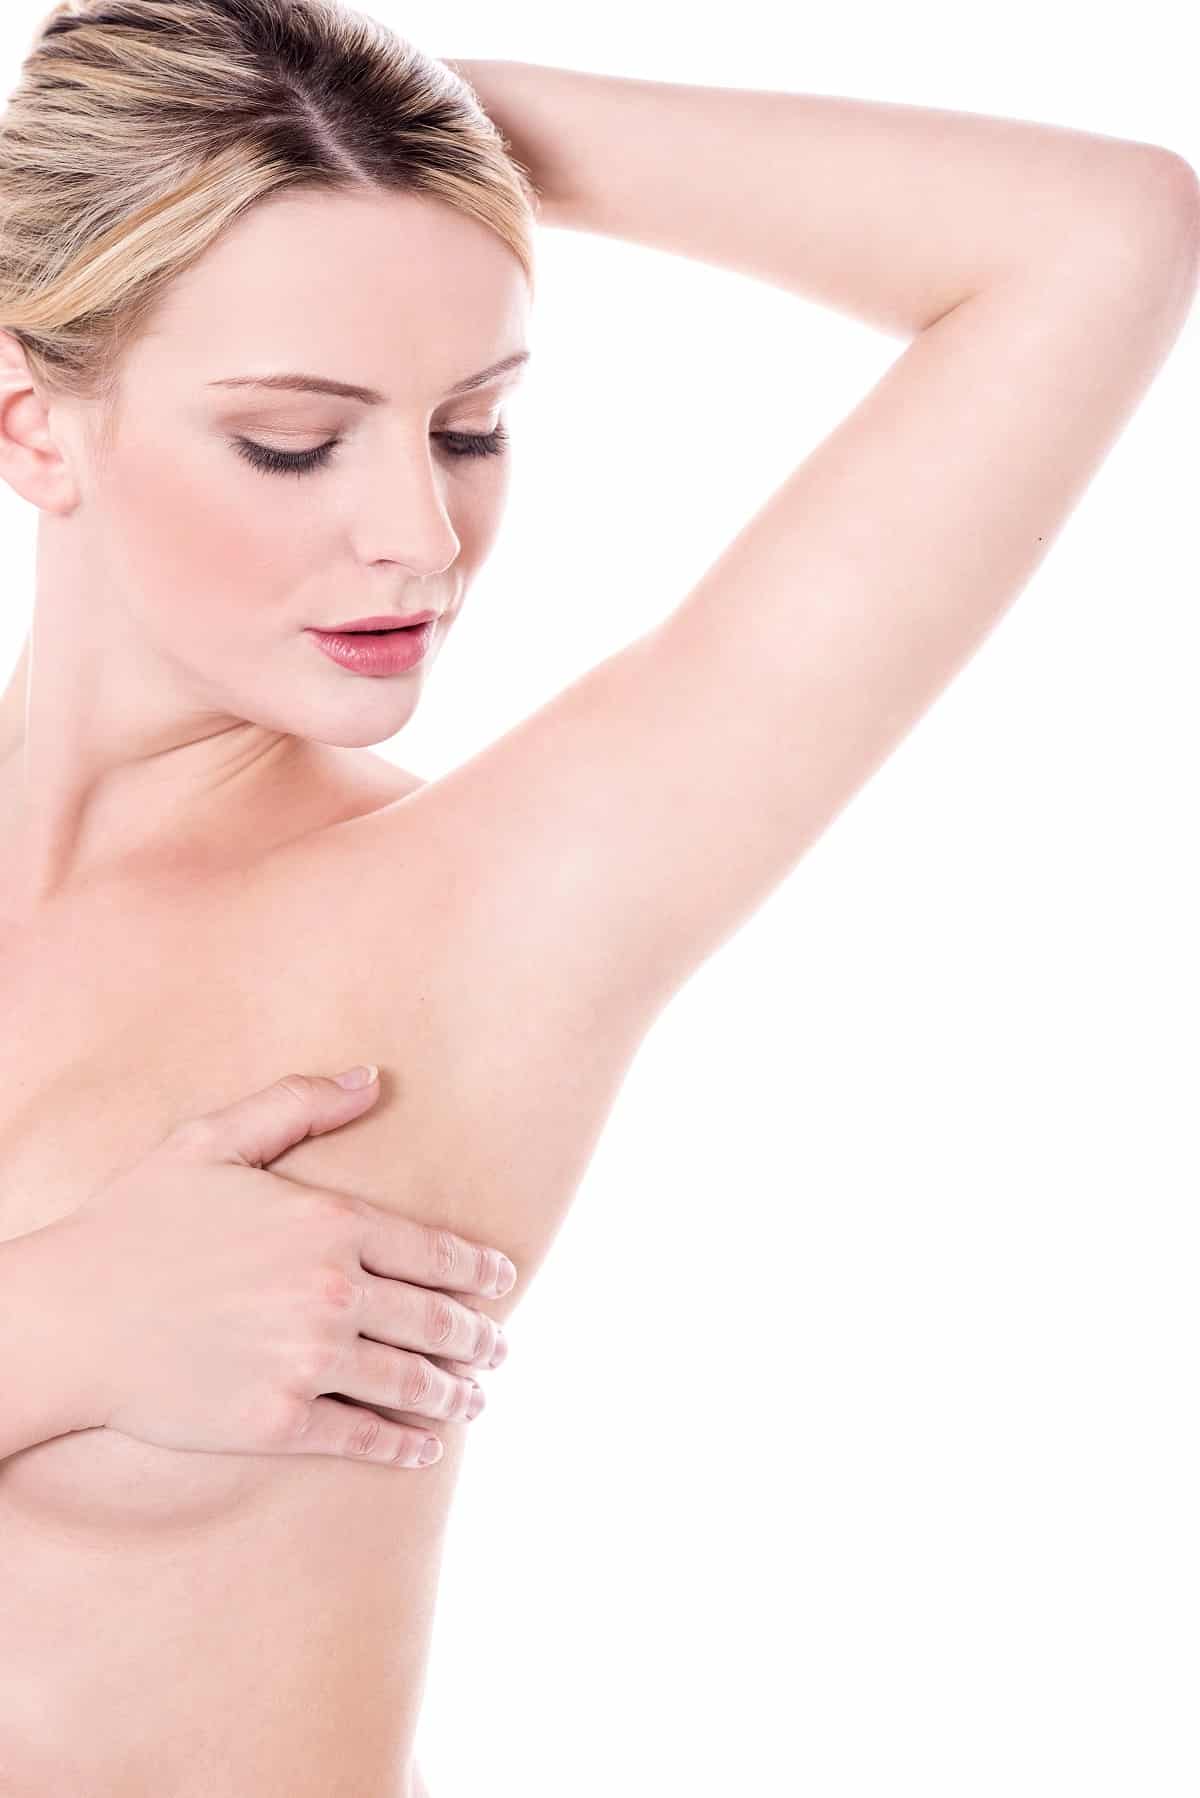 What Is “Drop and Fluff” After Breast Augmentation?